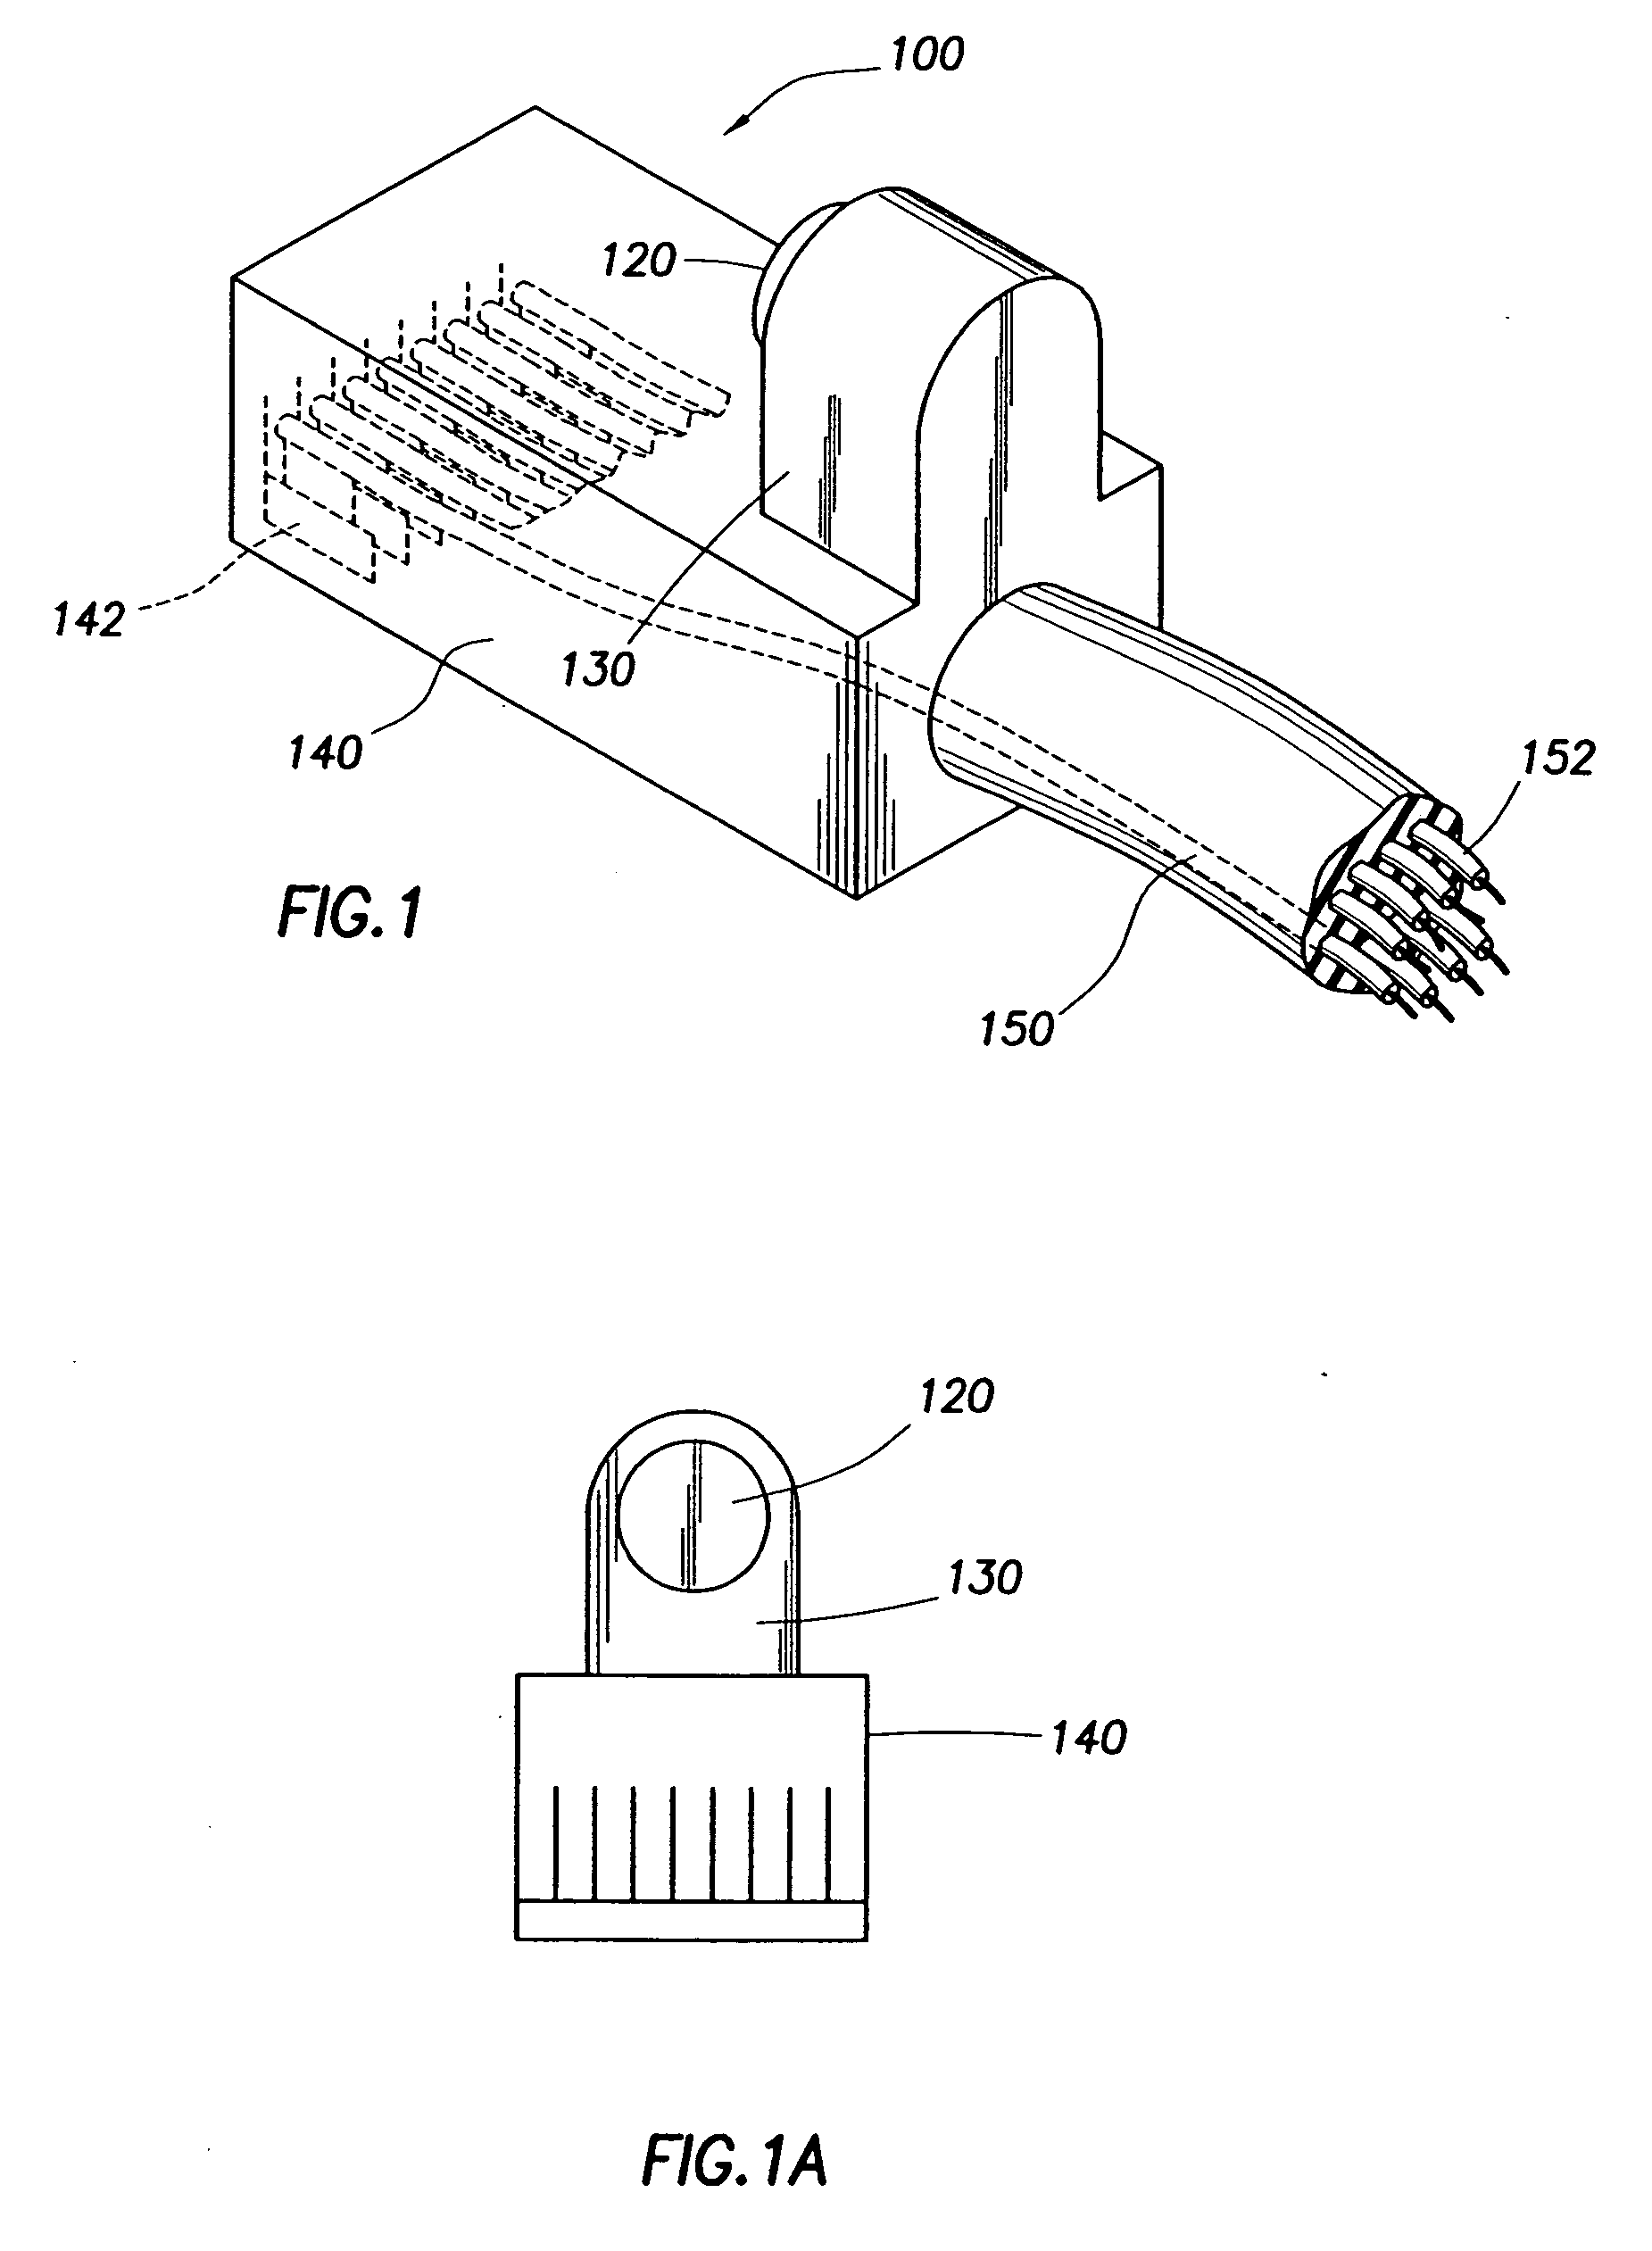 Method for transmitting data using a releasable connector